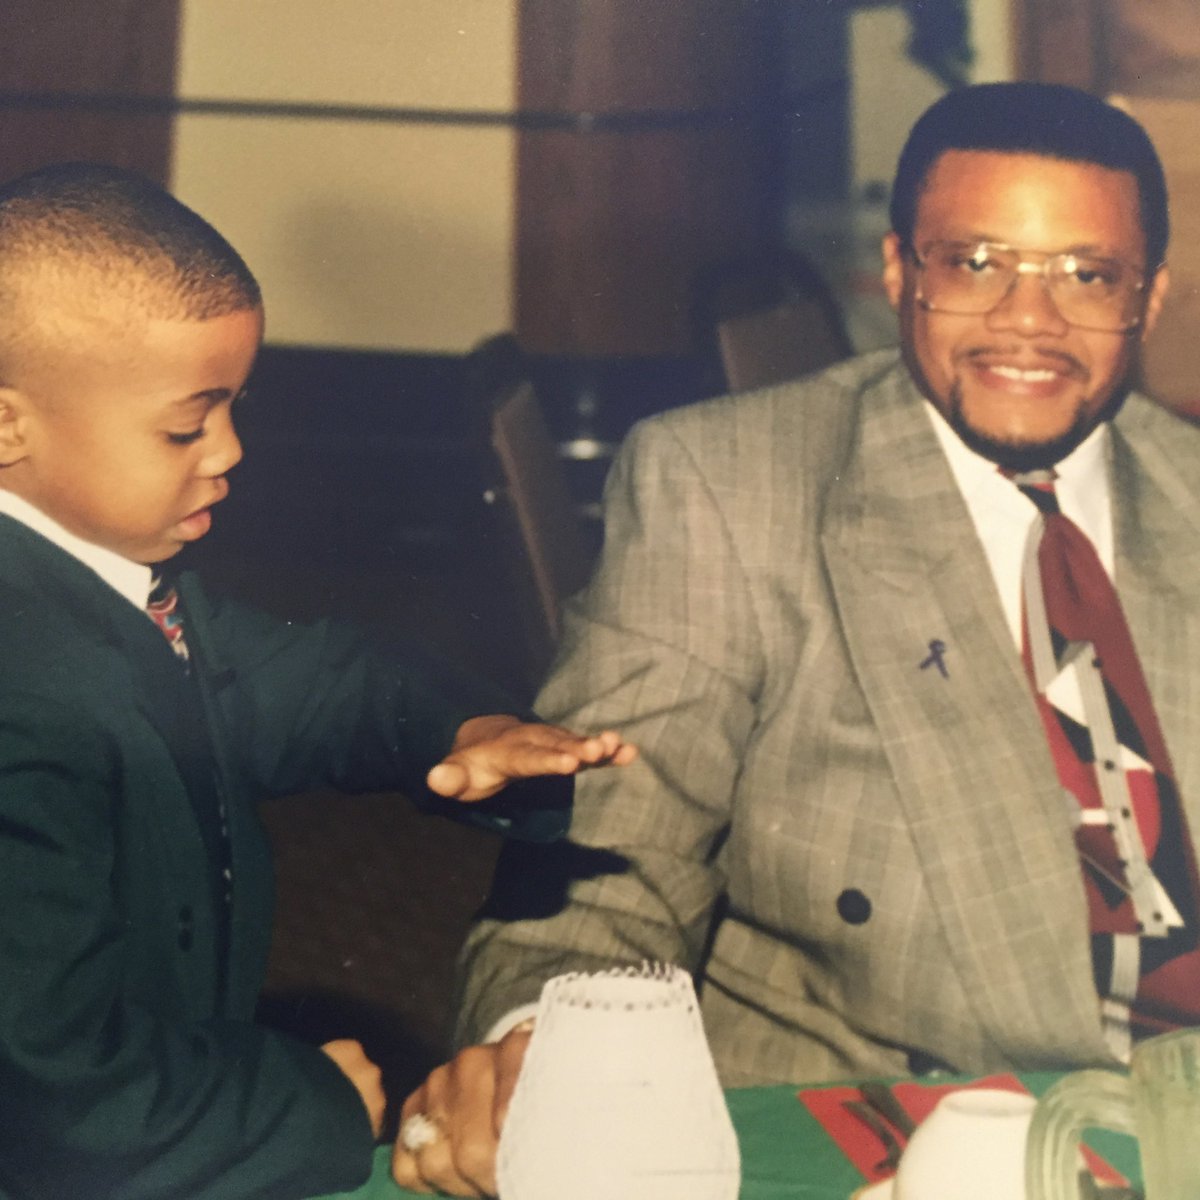 #tbt Hanging with my son @_AmirMathis back in the day. He thought he was my boss back then and still thinks he is. LOL